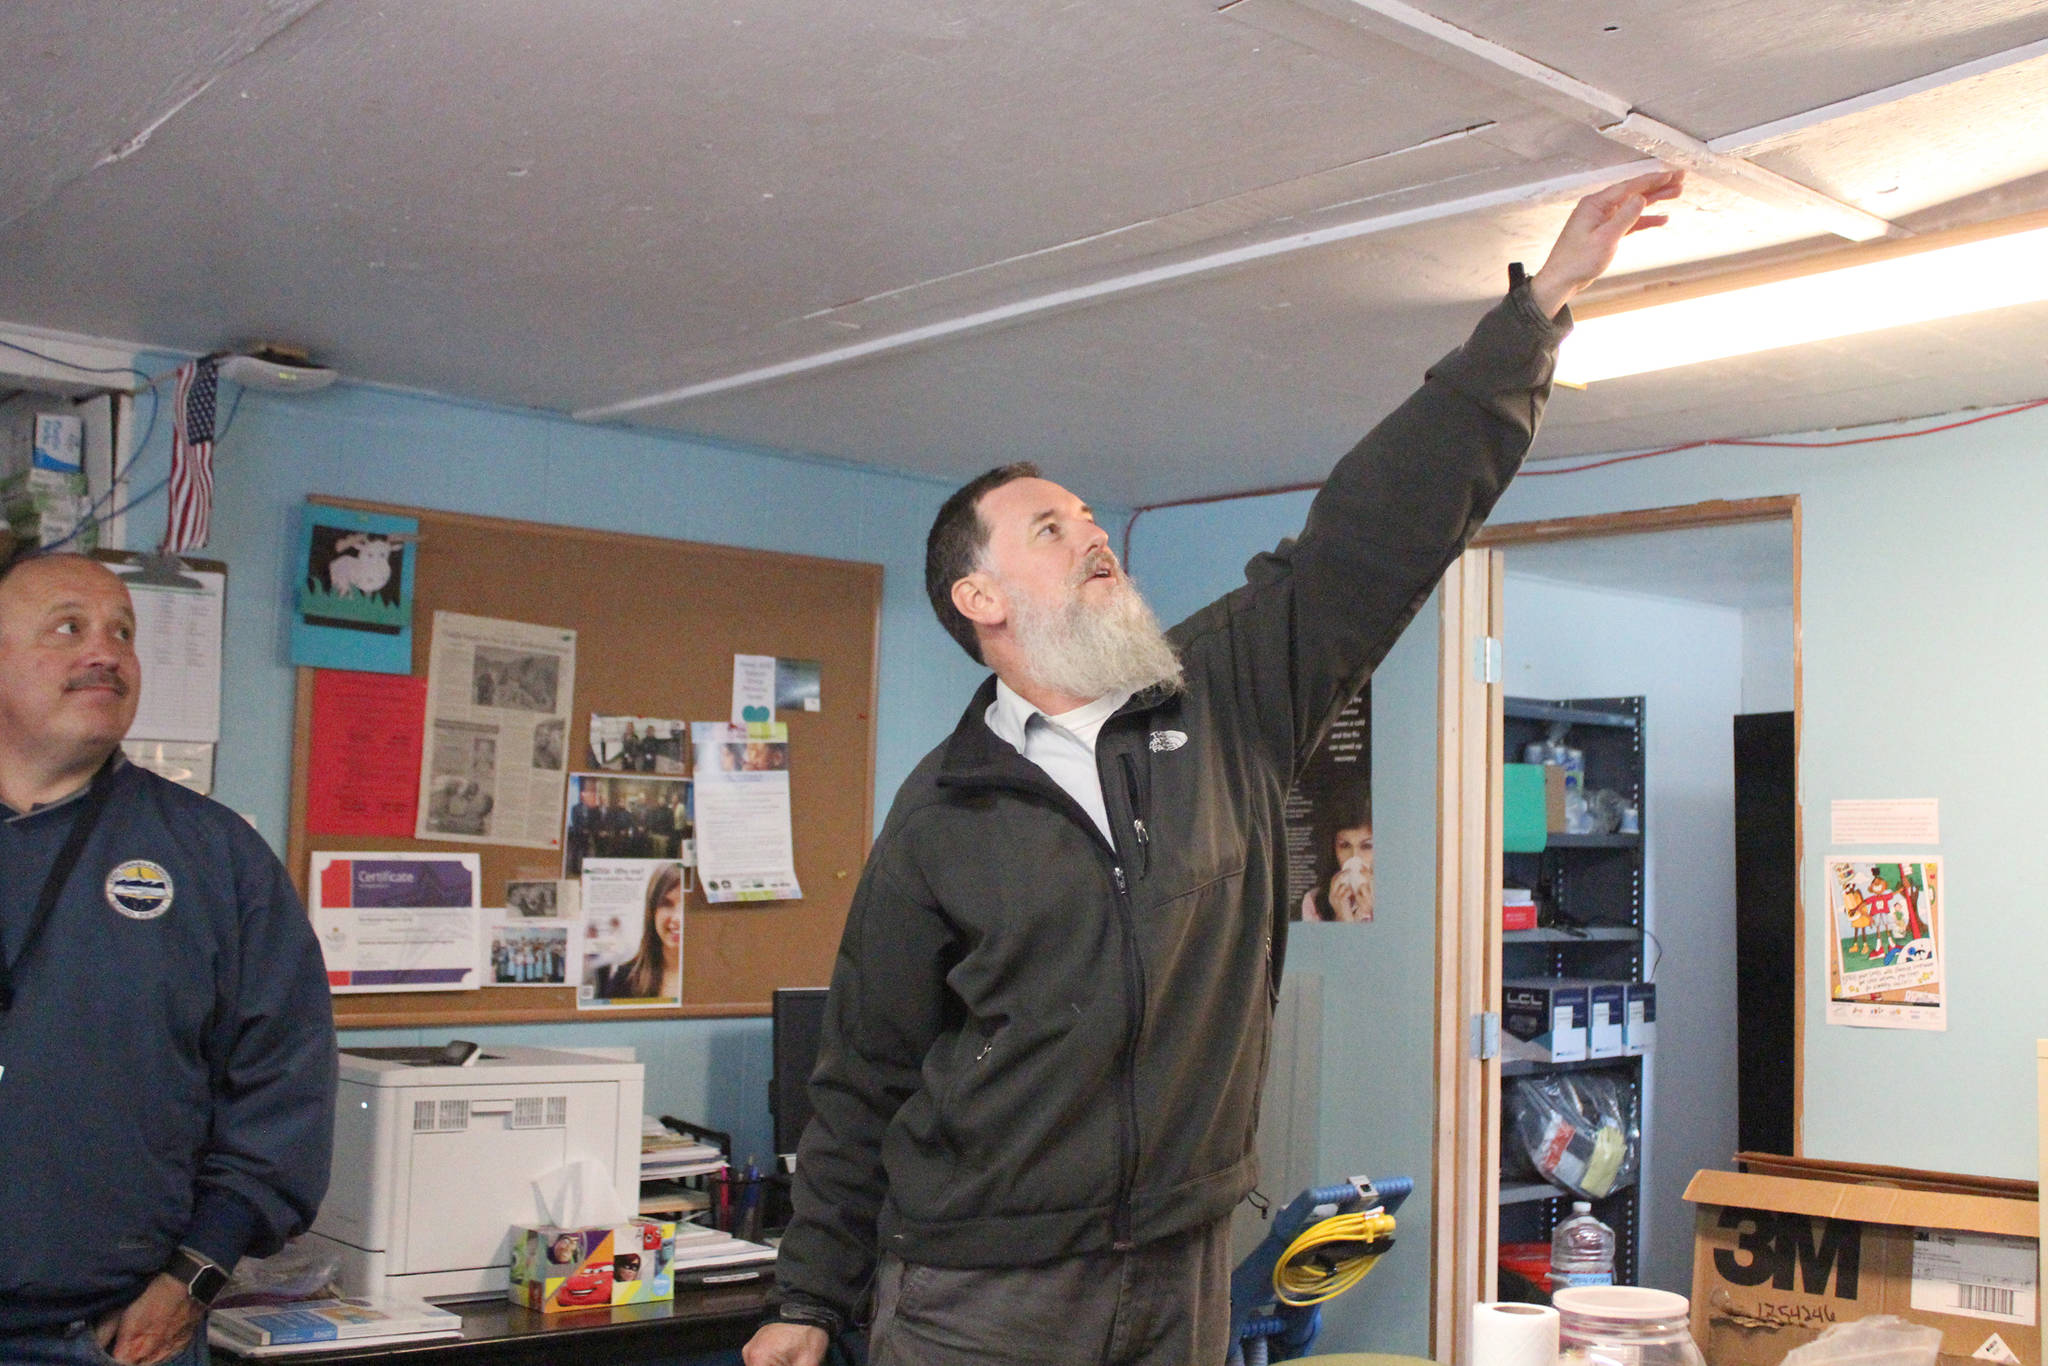 Mike Wojciak, regional principal of Voznesenka School and Kachemak Selo School, shows Kenai Peninsula Borough School District Superintendent Sean Dusek a spot in one of the Kachemak Selo School buildings where the ceiling dips and slants during a visit Thursday, Aug. 30, 2018 in the village at the head of Kachemak Bay, Alaska. The three buildings that make up the school have been in need of replacement for years. (Photo by Megan Pacer/Homer News)